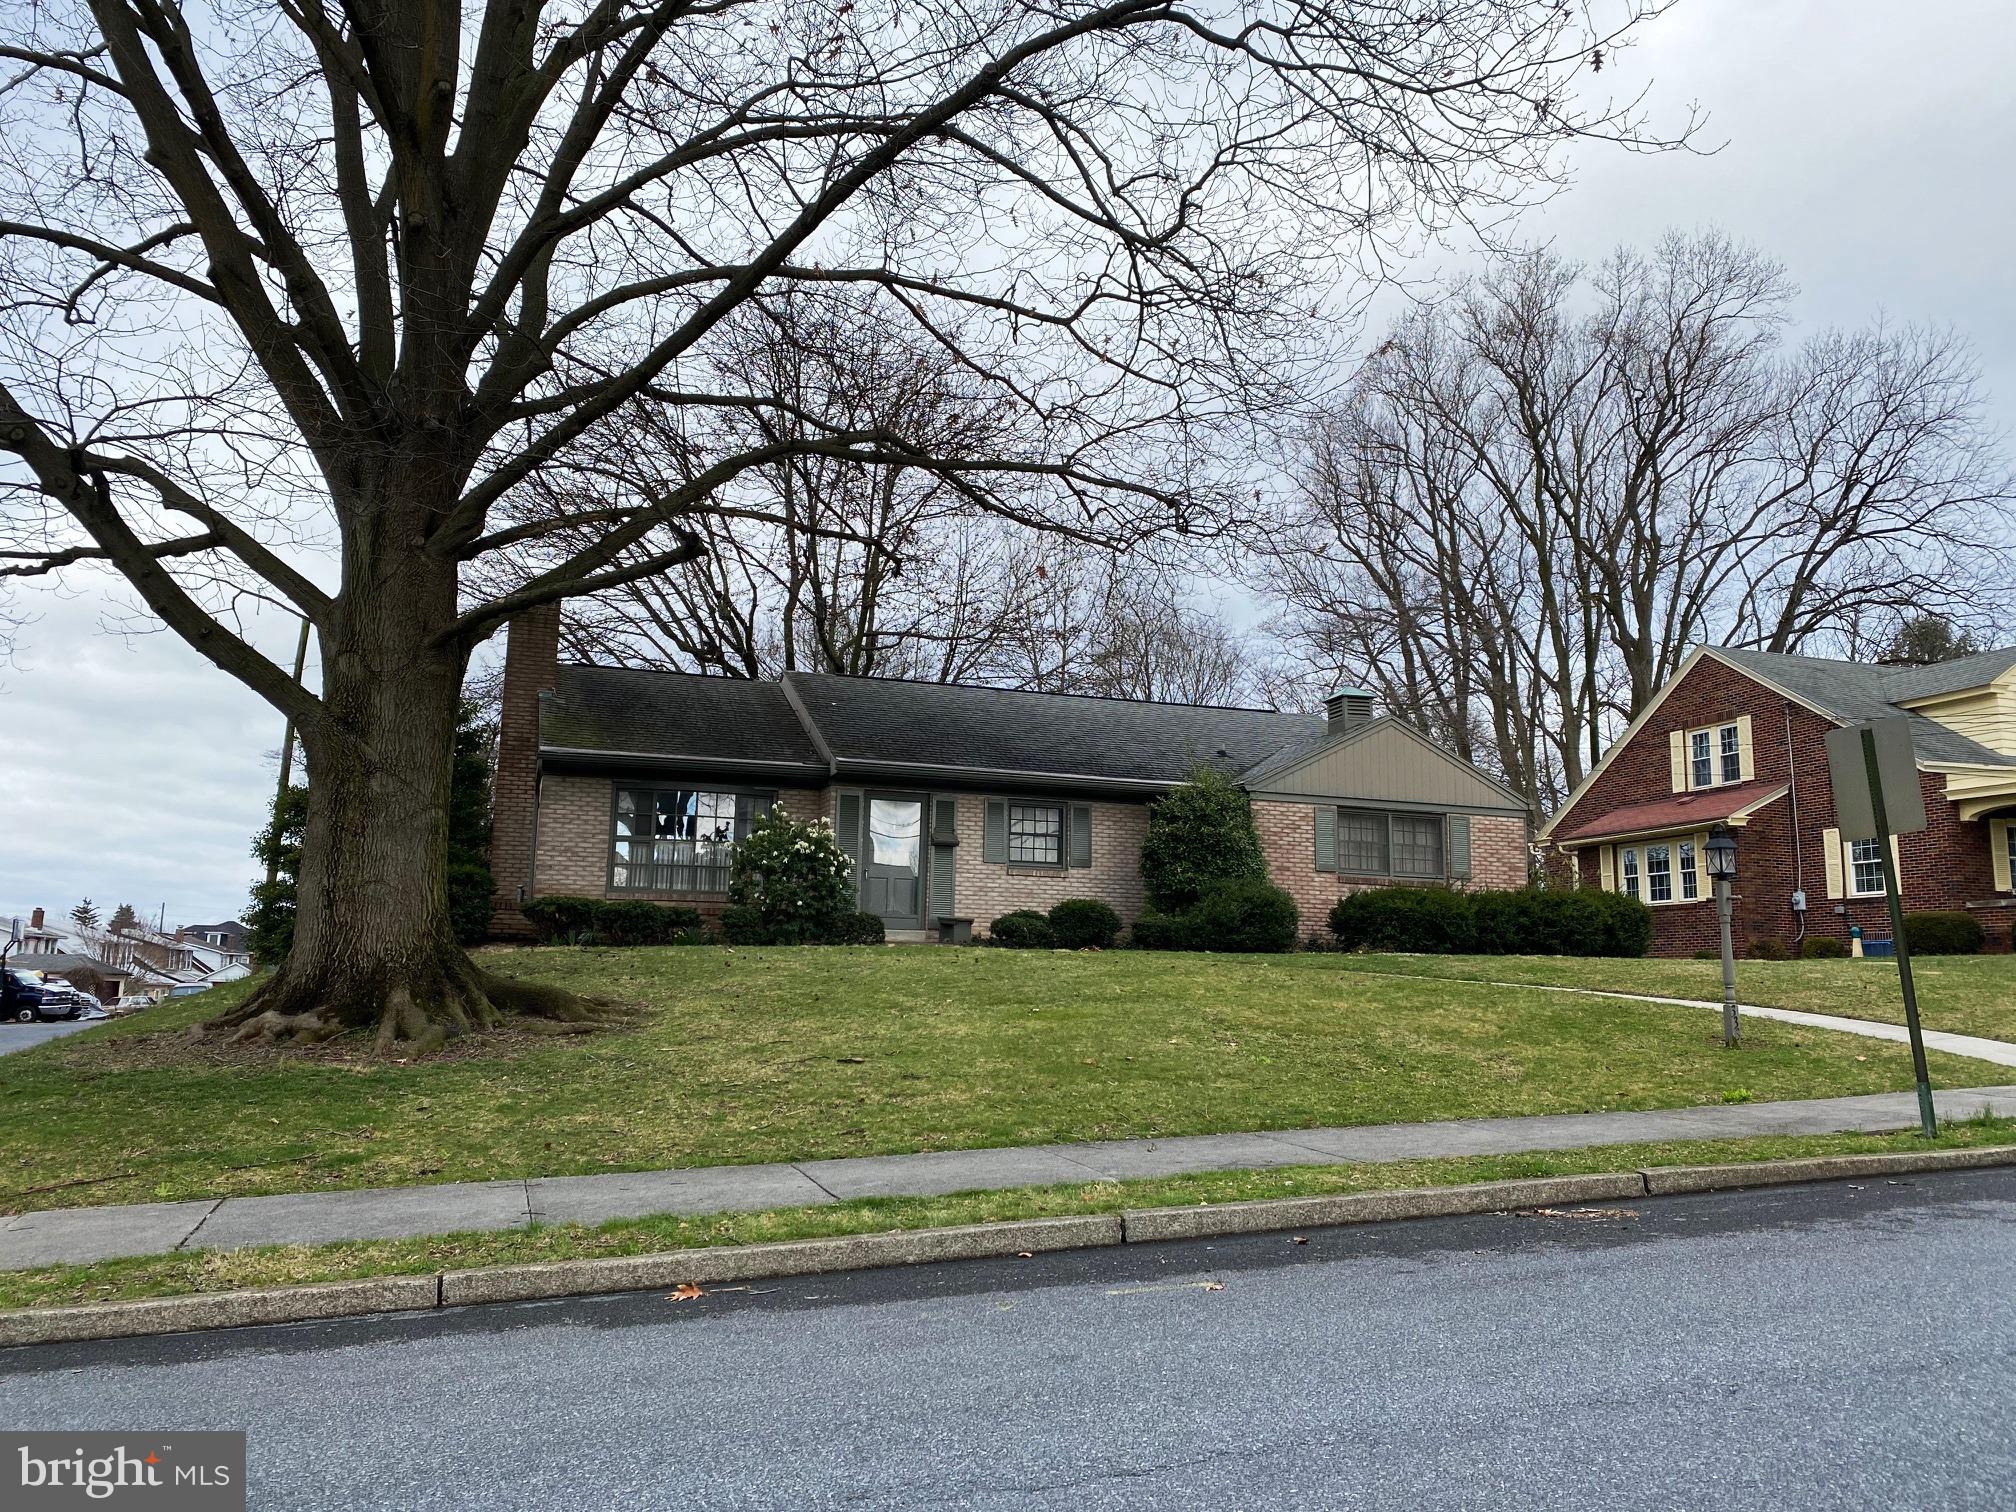 a house that has a tree in front of a house